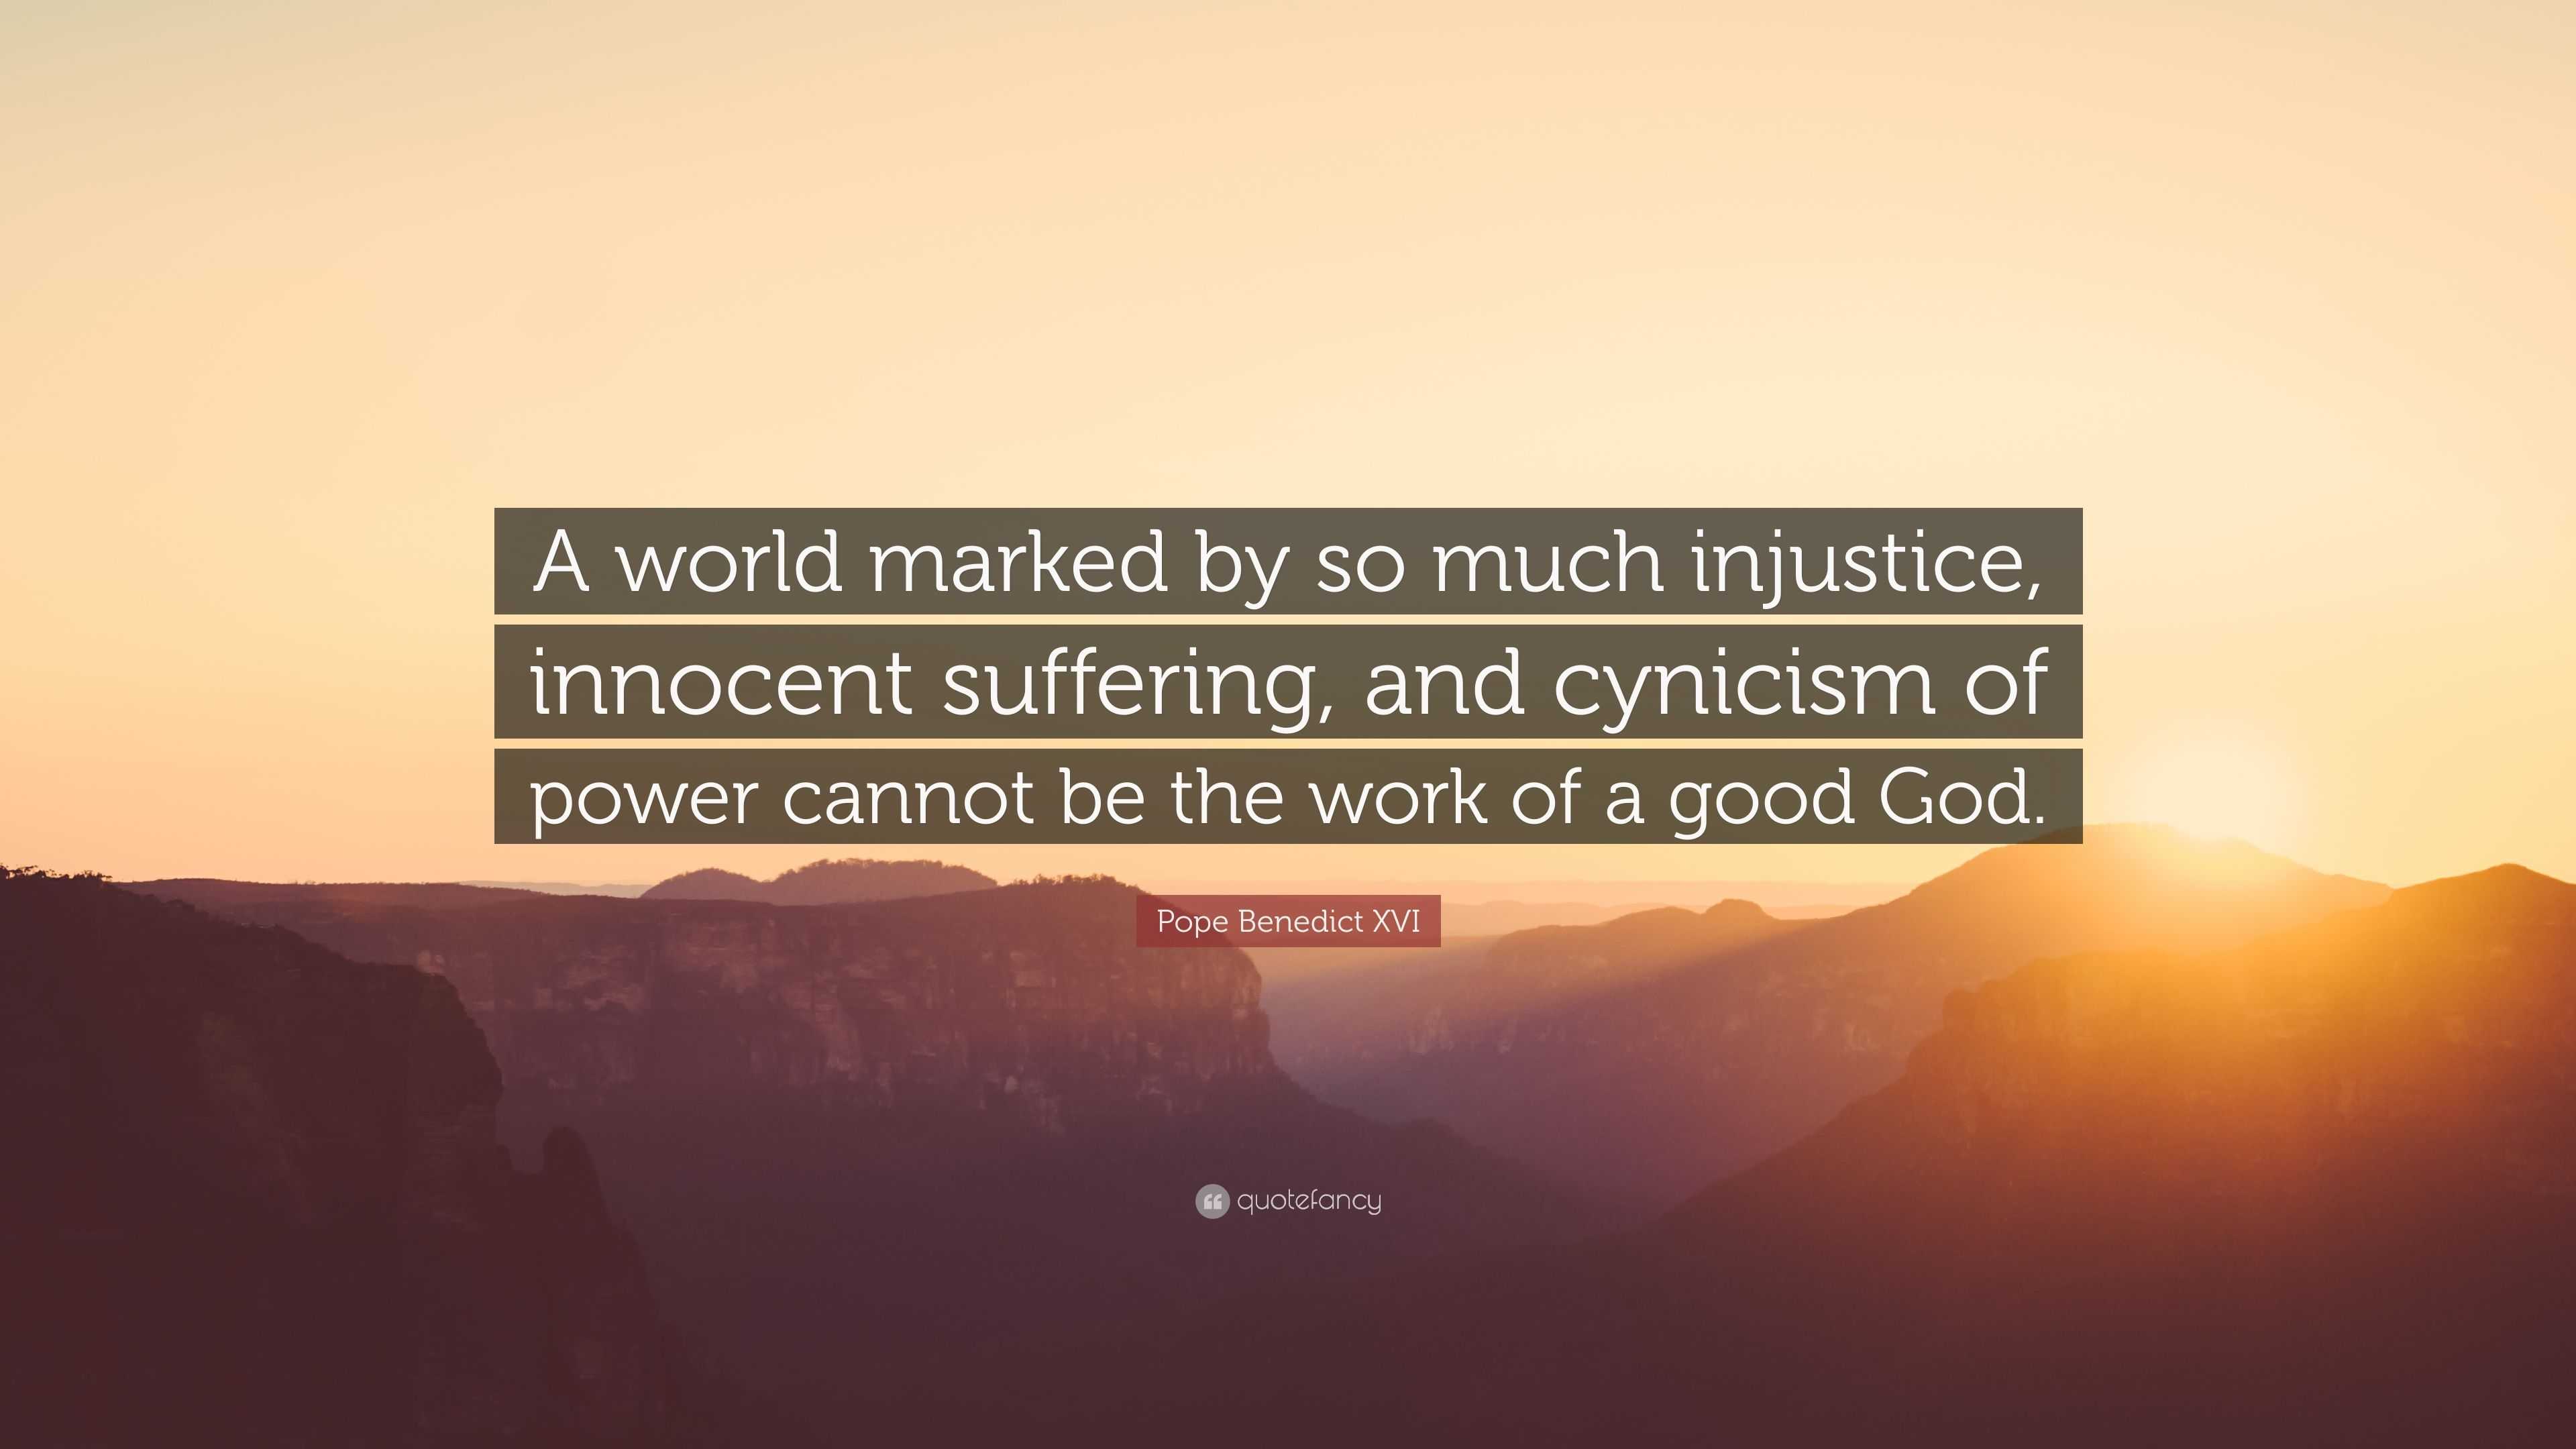 Pope Benedict XVI Quote: “A world marked by so much injustice